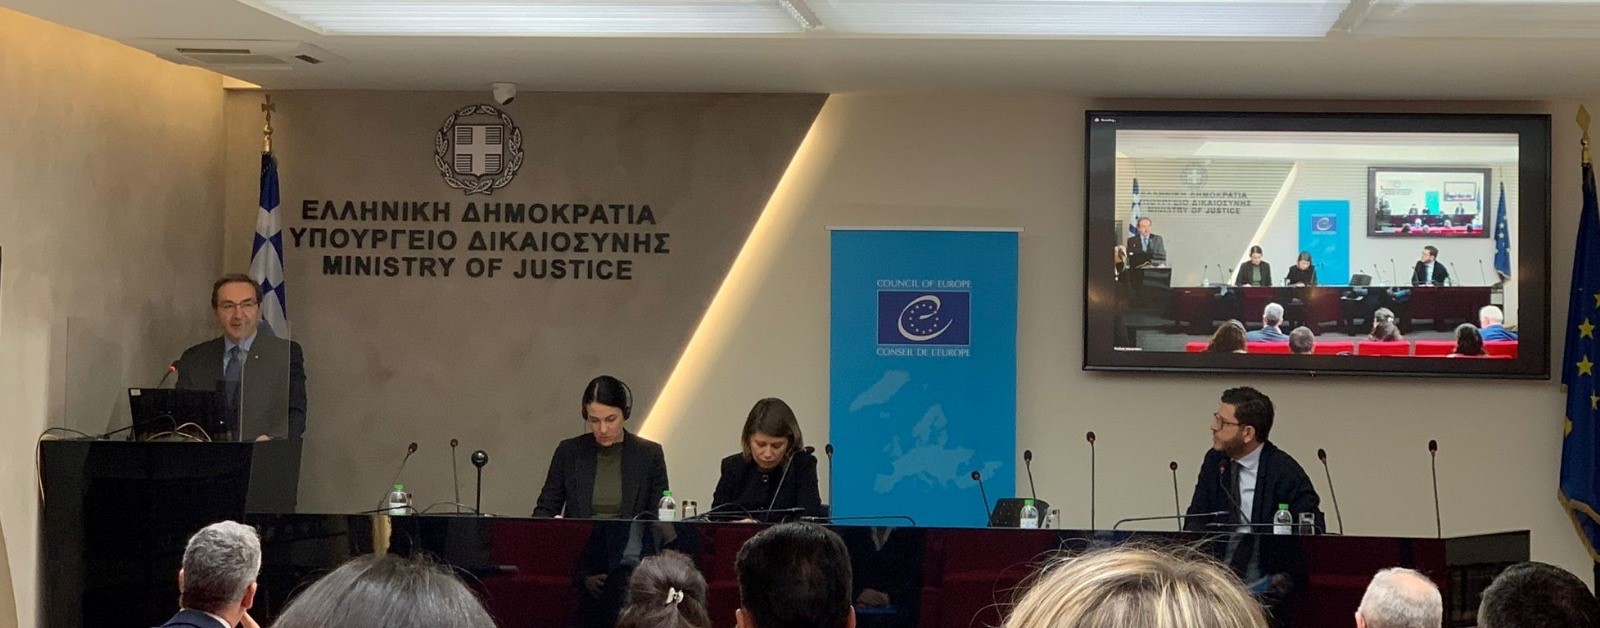 Application of new remedy for conditions of detention examined in Greece